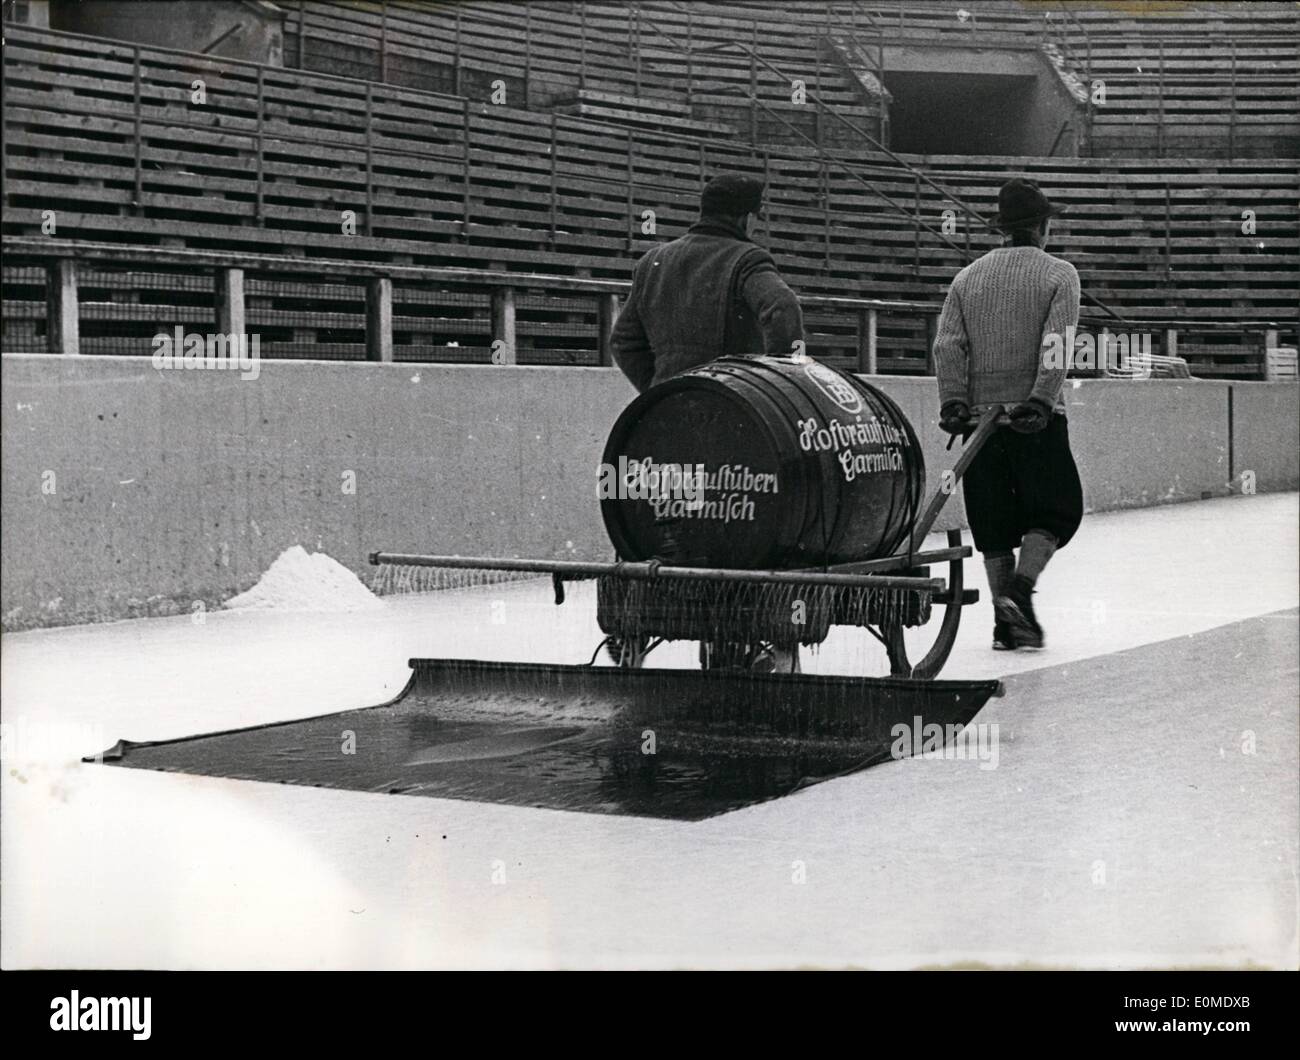 Jan. 01, 1955 - ''In Bavaria one runs on beer..'' jokes one man, newly arrived to the city, as he takes a look at the ice stadium of Garmisch-Partenkirchen. These men are busy ''ironing out'' the course.there is no beer in the barrel, but water. Argentina - People at Cattle Stock Photo